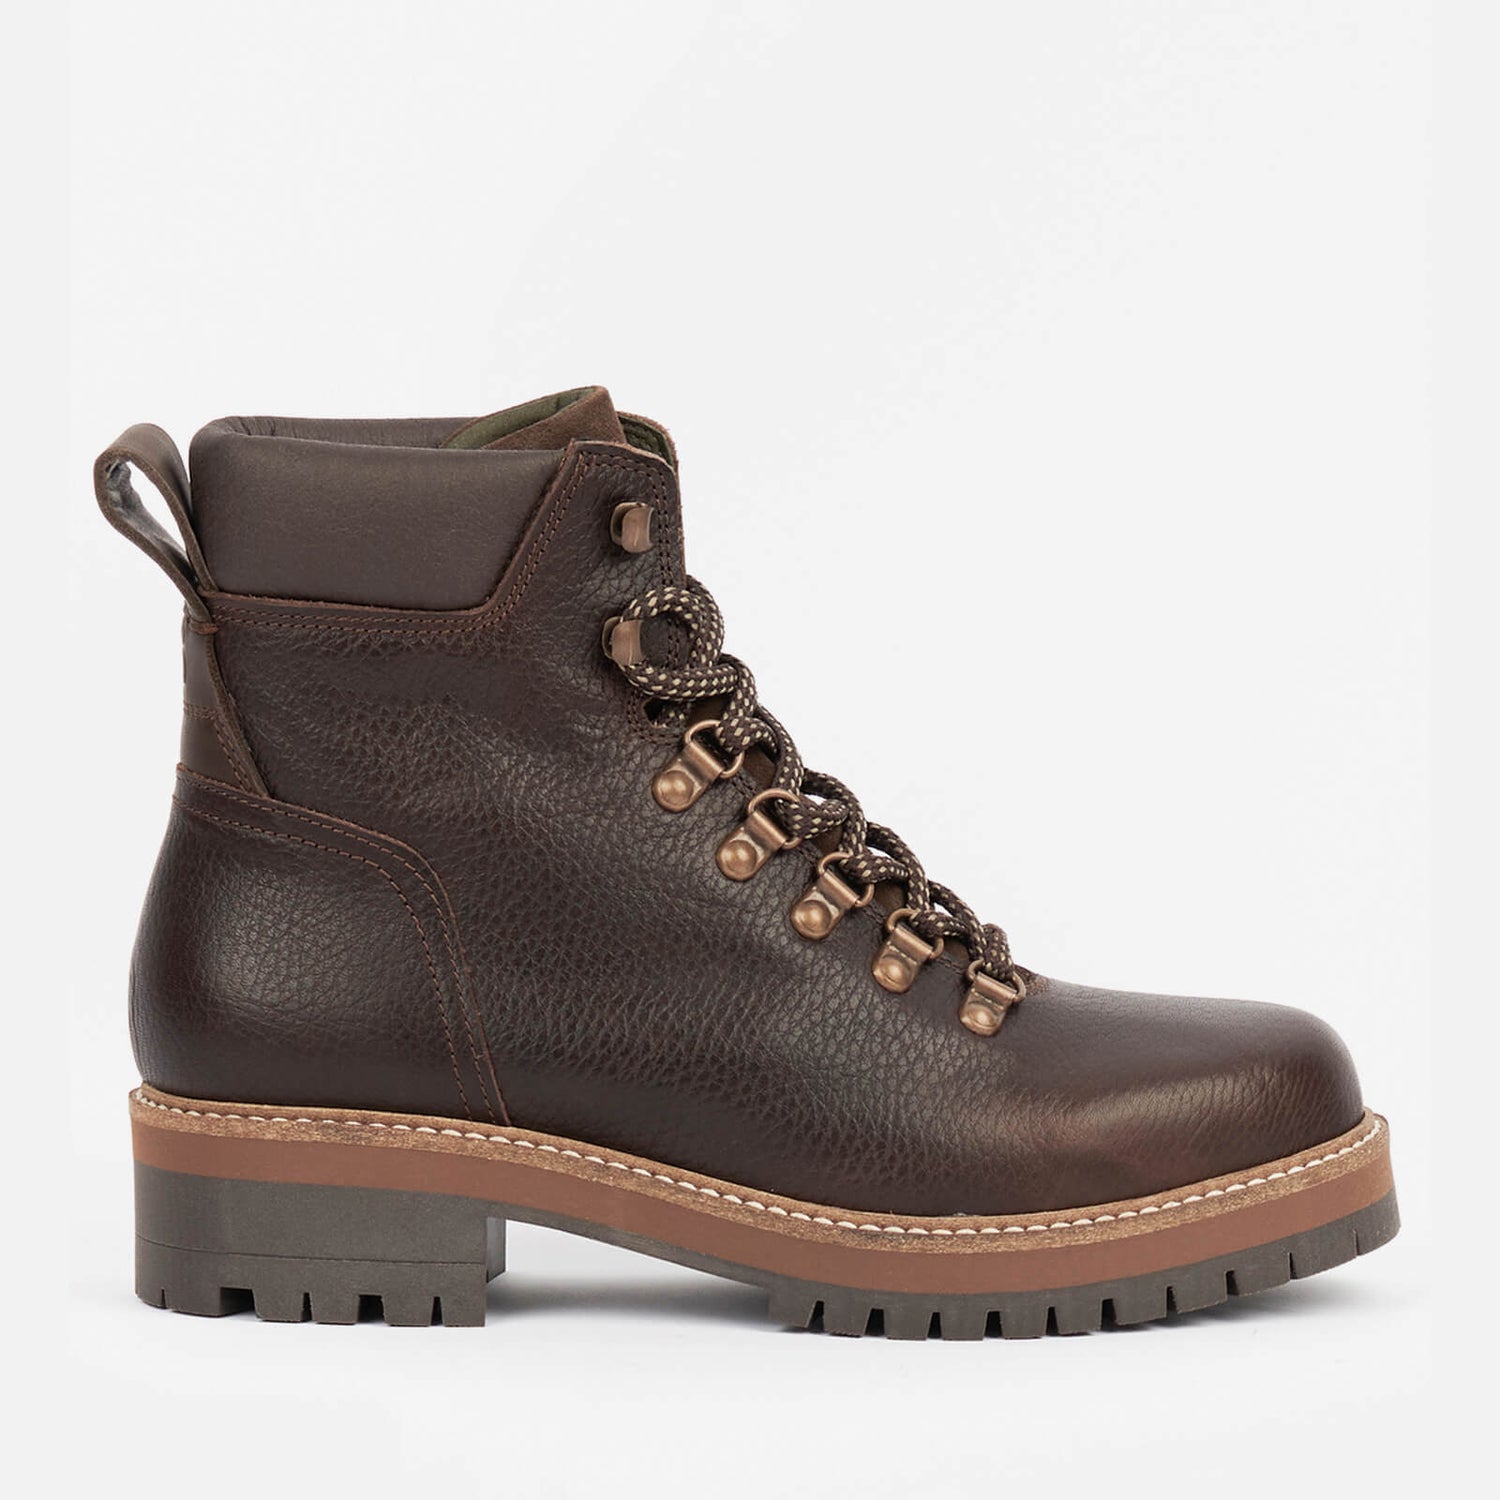 Barbour Stanton Leather Boots